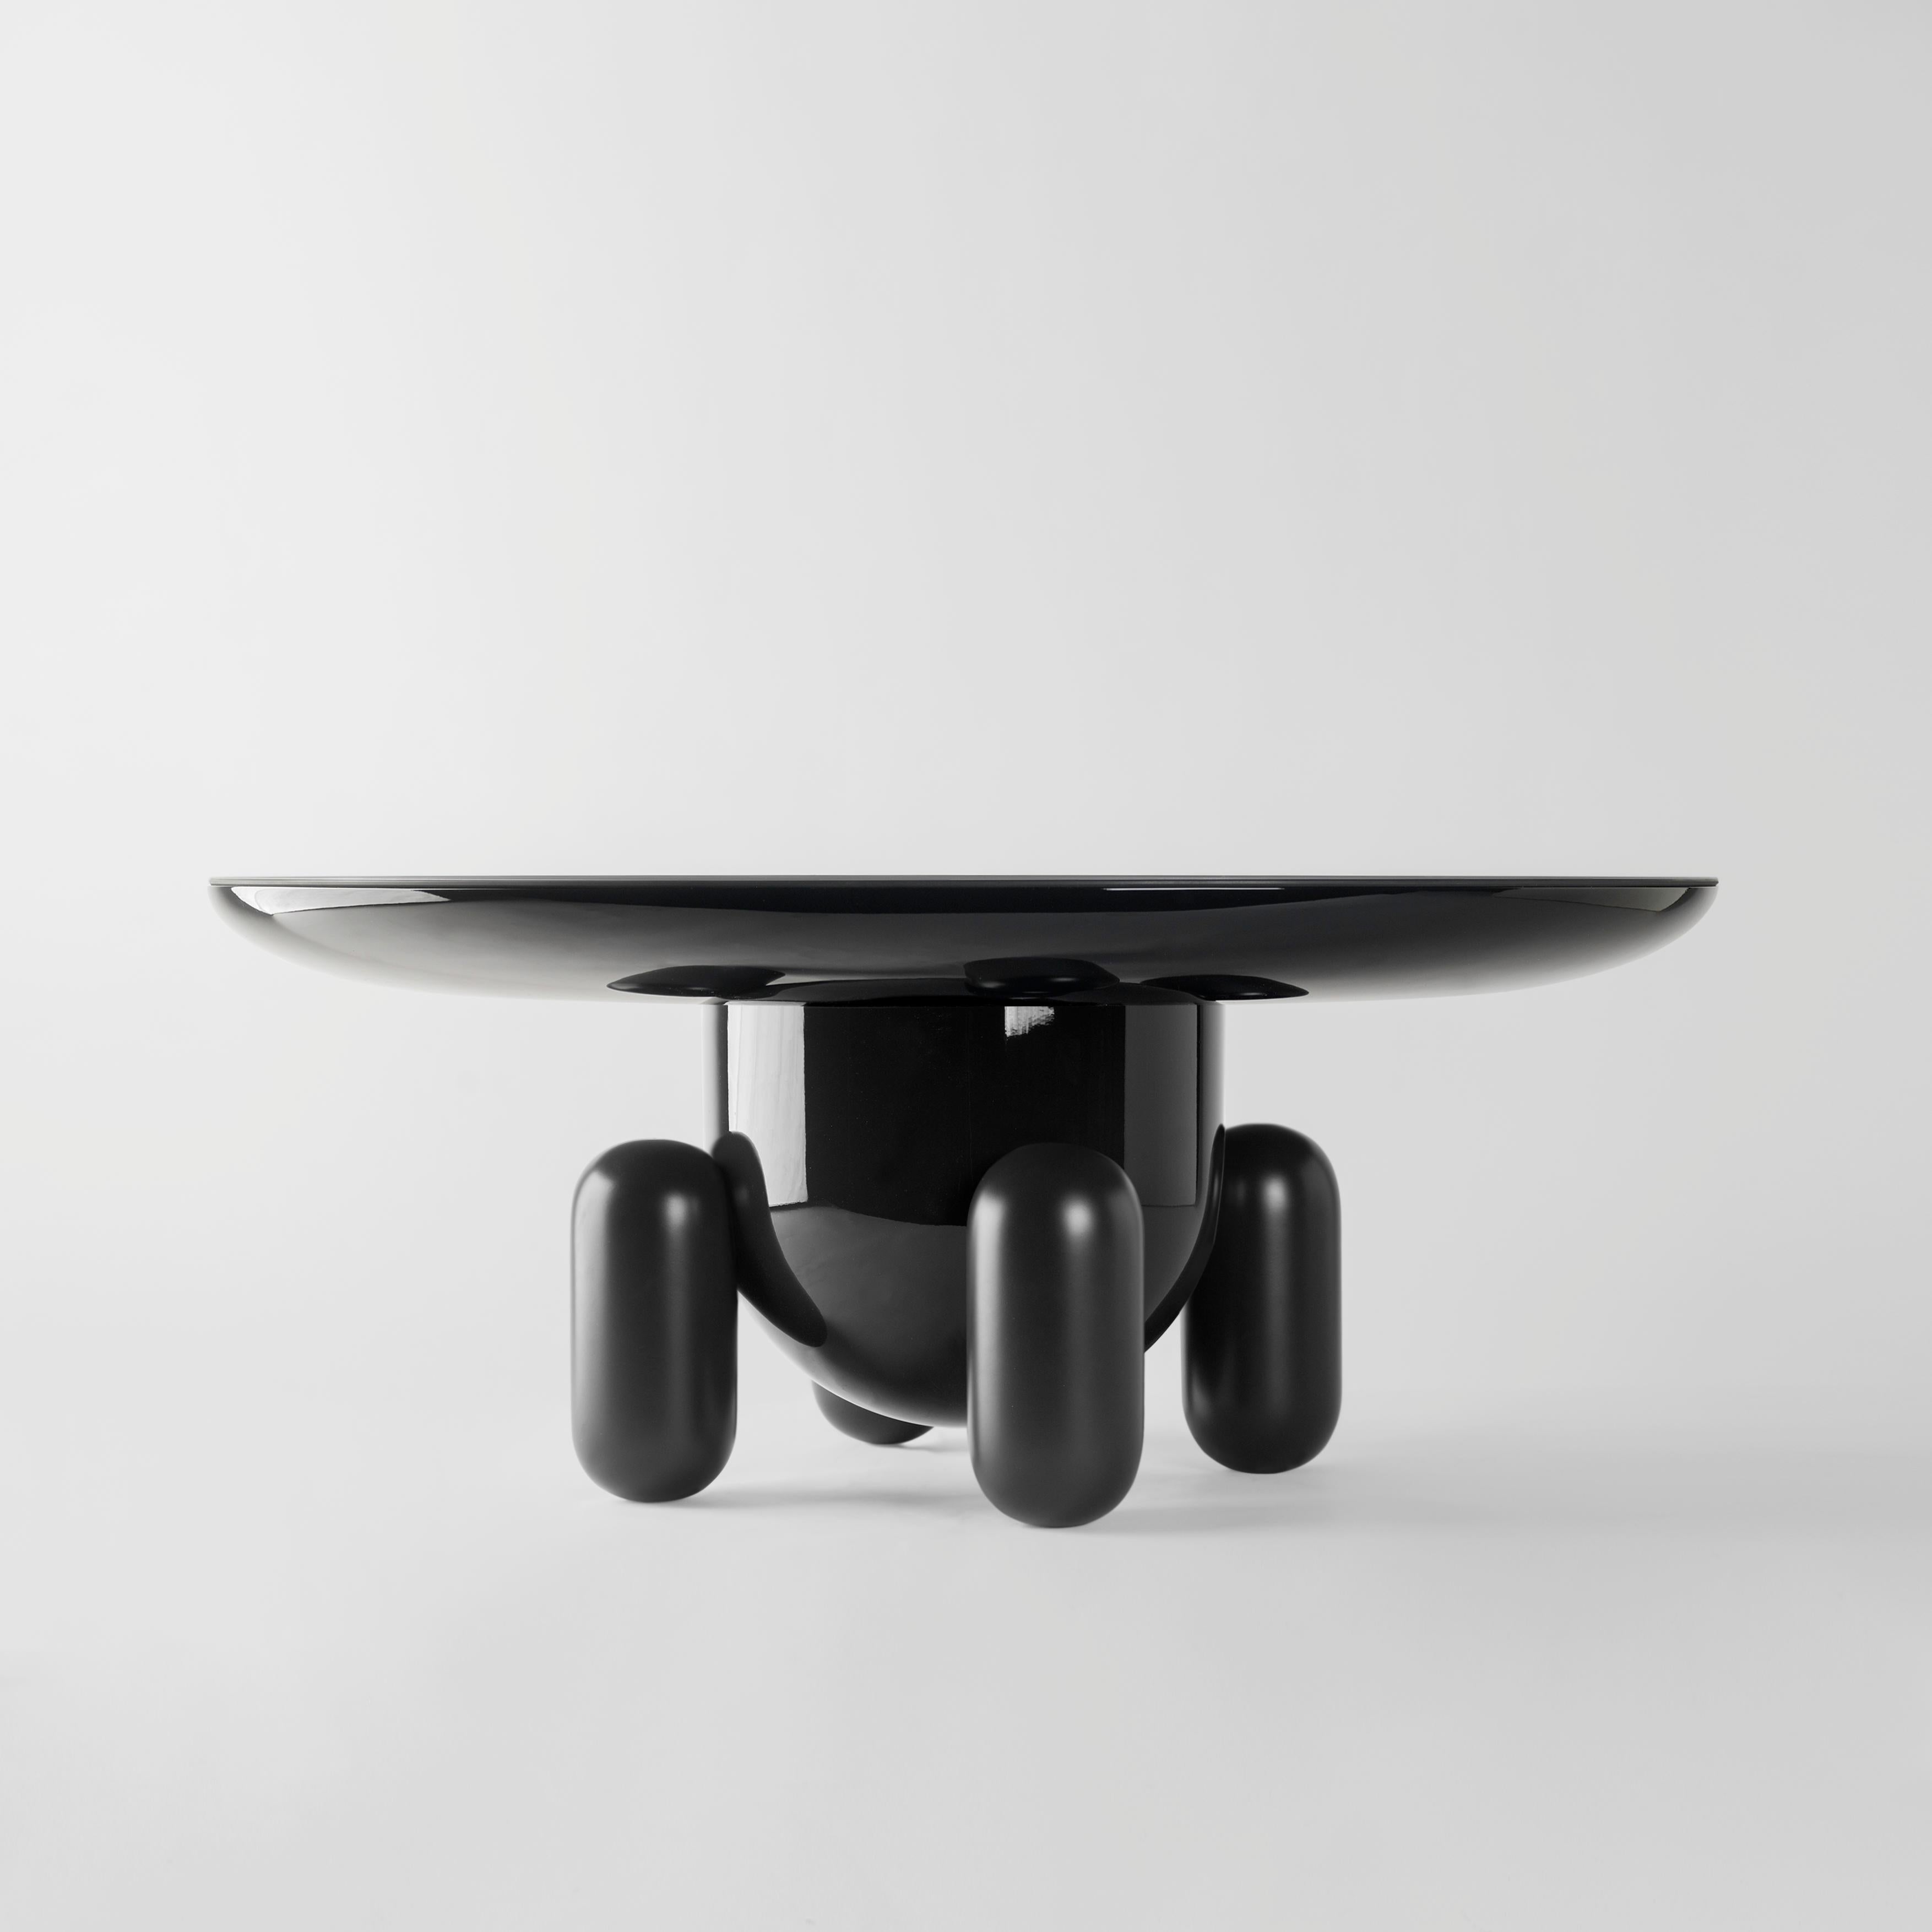 Lacquered Pair of Jaime Hayon Dark Grey Explorer #03 & #01 Tables by BD Barcelona